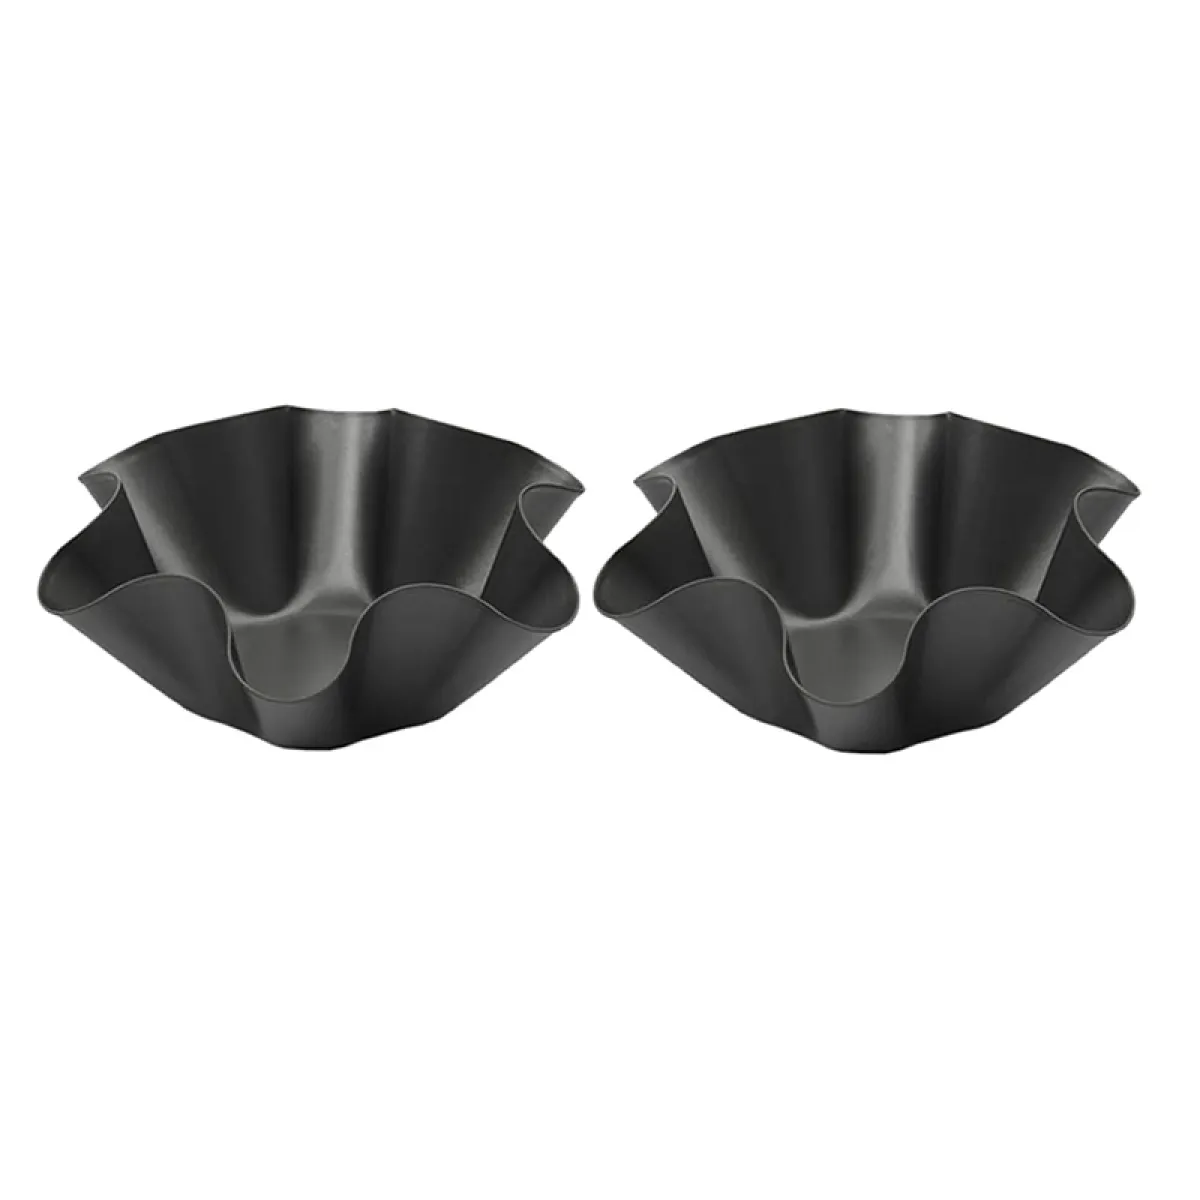 Non-Stick Carbon Steel Set of 4 Tostada Bakers Large Non-Stick Fluted Tortilla Shell Pans Taco Salad Bowl Makers